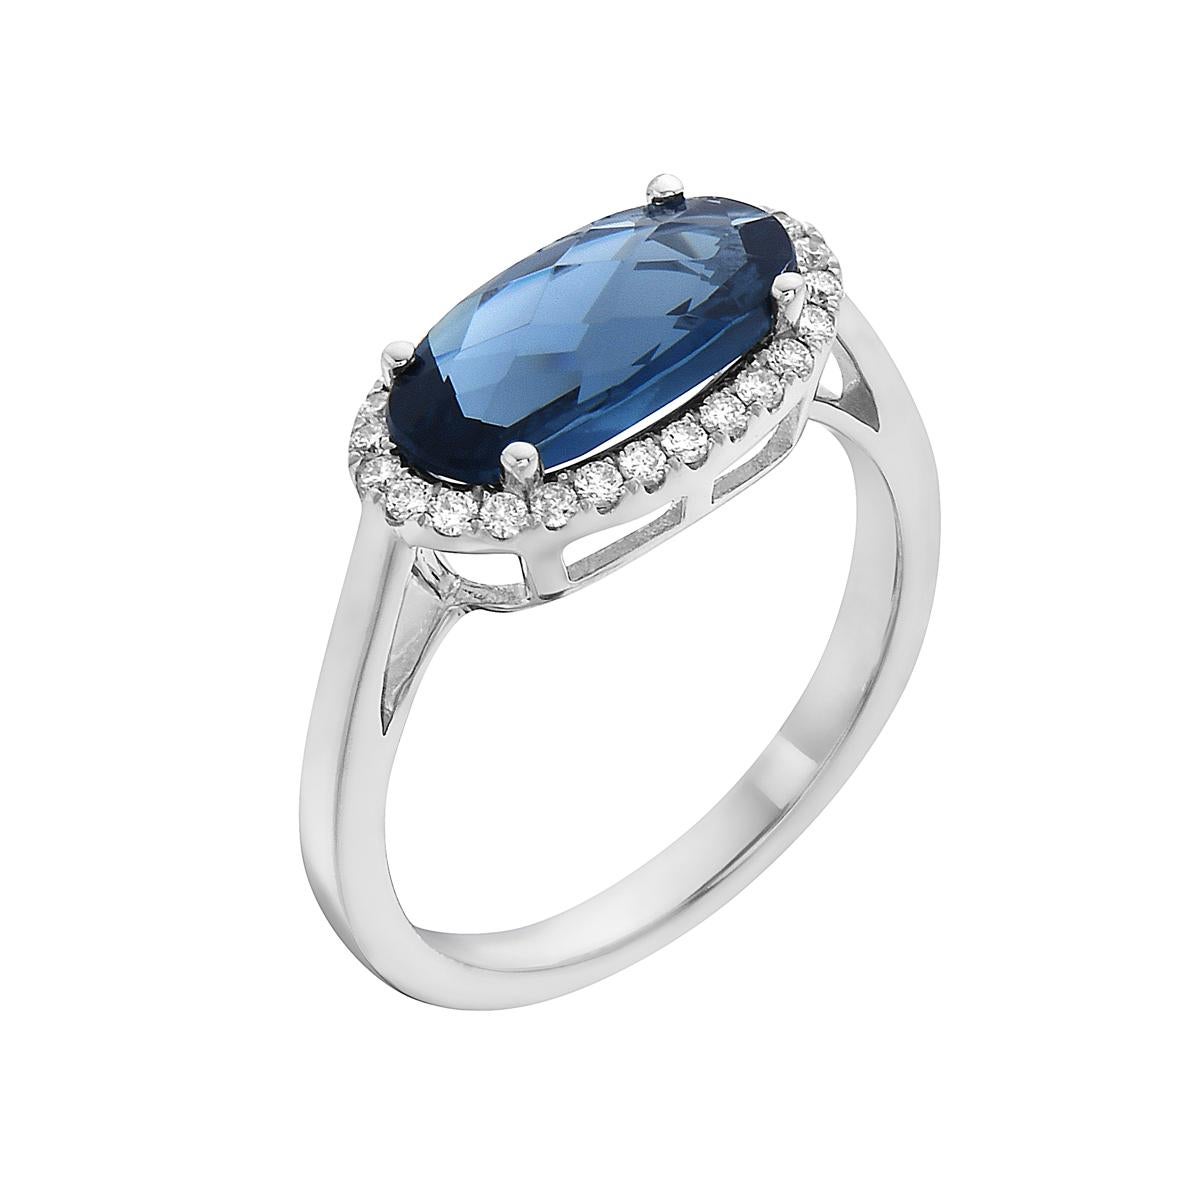 With this exquisite semi-precious London blue topaz ring, style and glamour are in the spotlight. This 14-karat oval cut ring is made from 2.8 grams of gold, 1 london blue topaz totaling 2.12 karats, and is surrounded by 26 round SI1-SI2, GH color